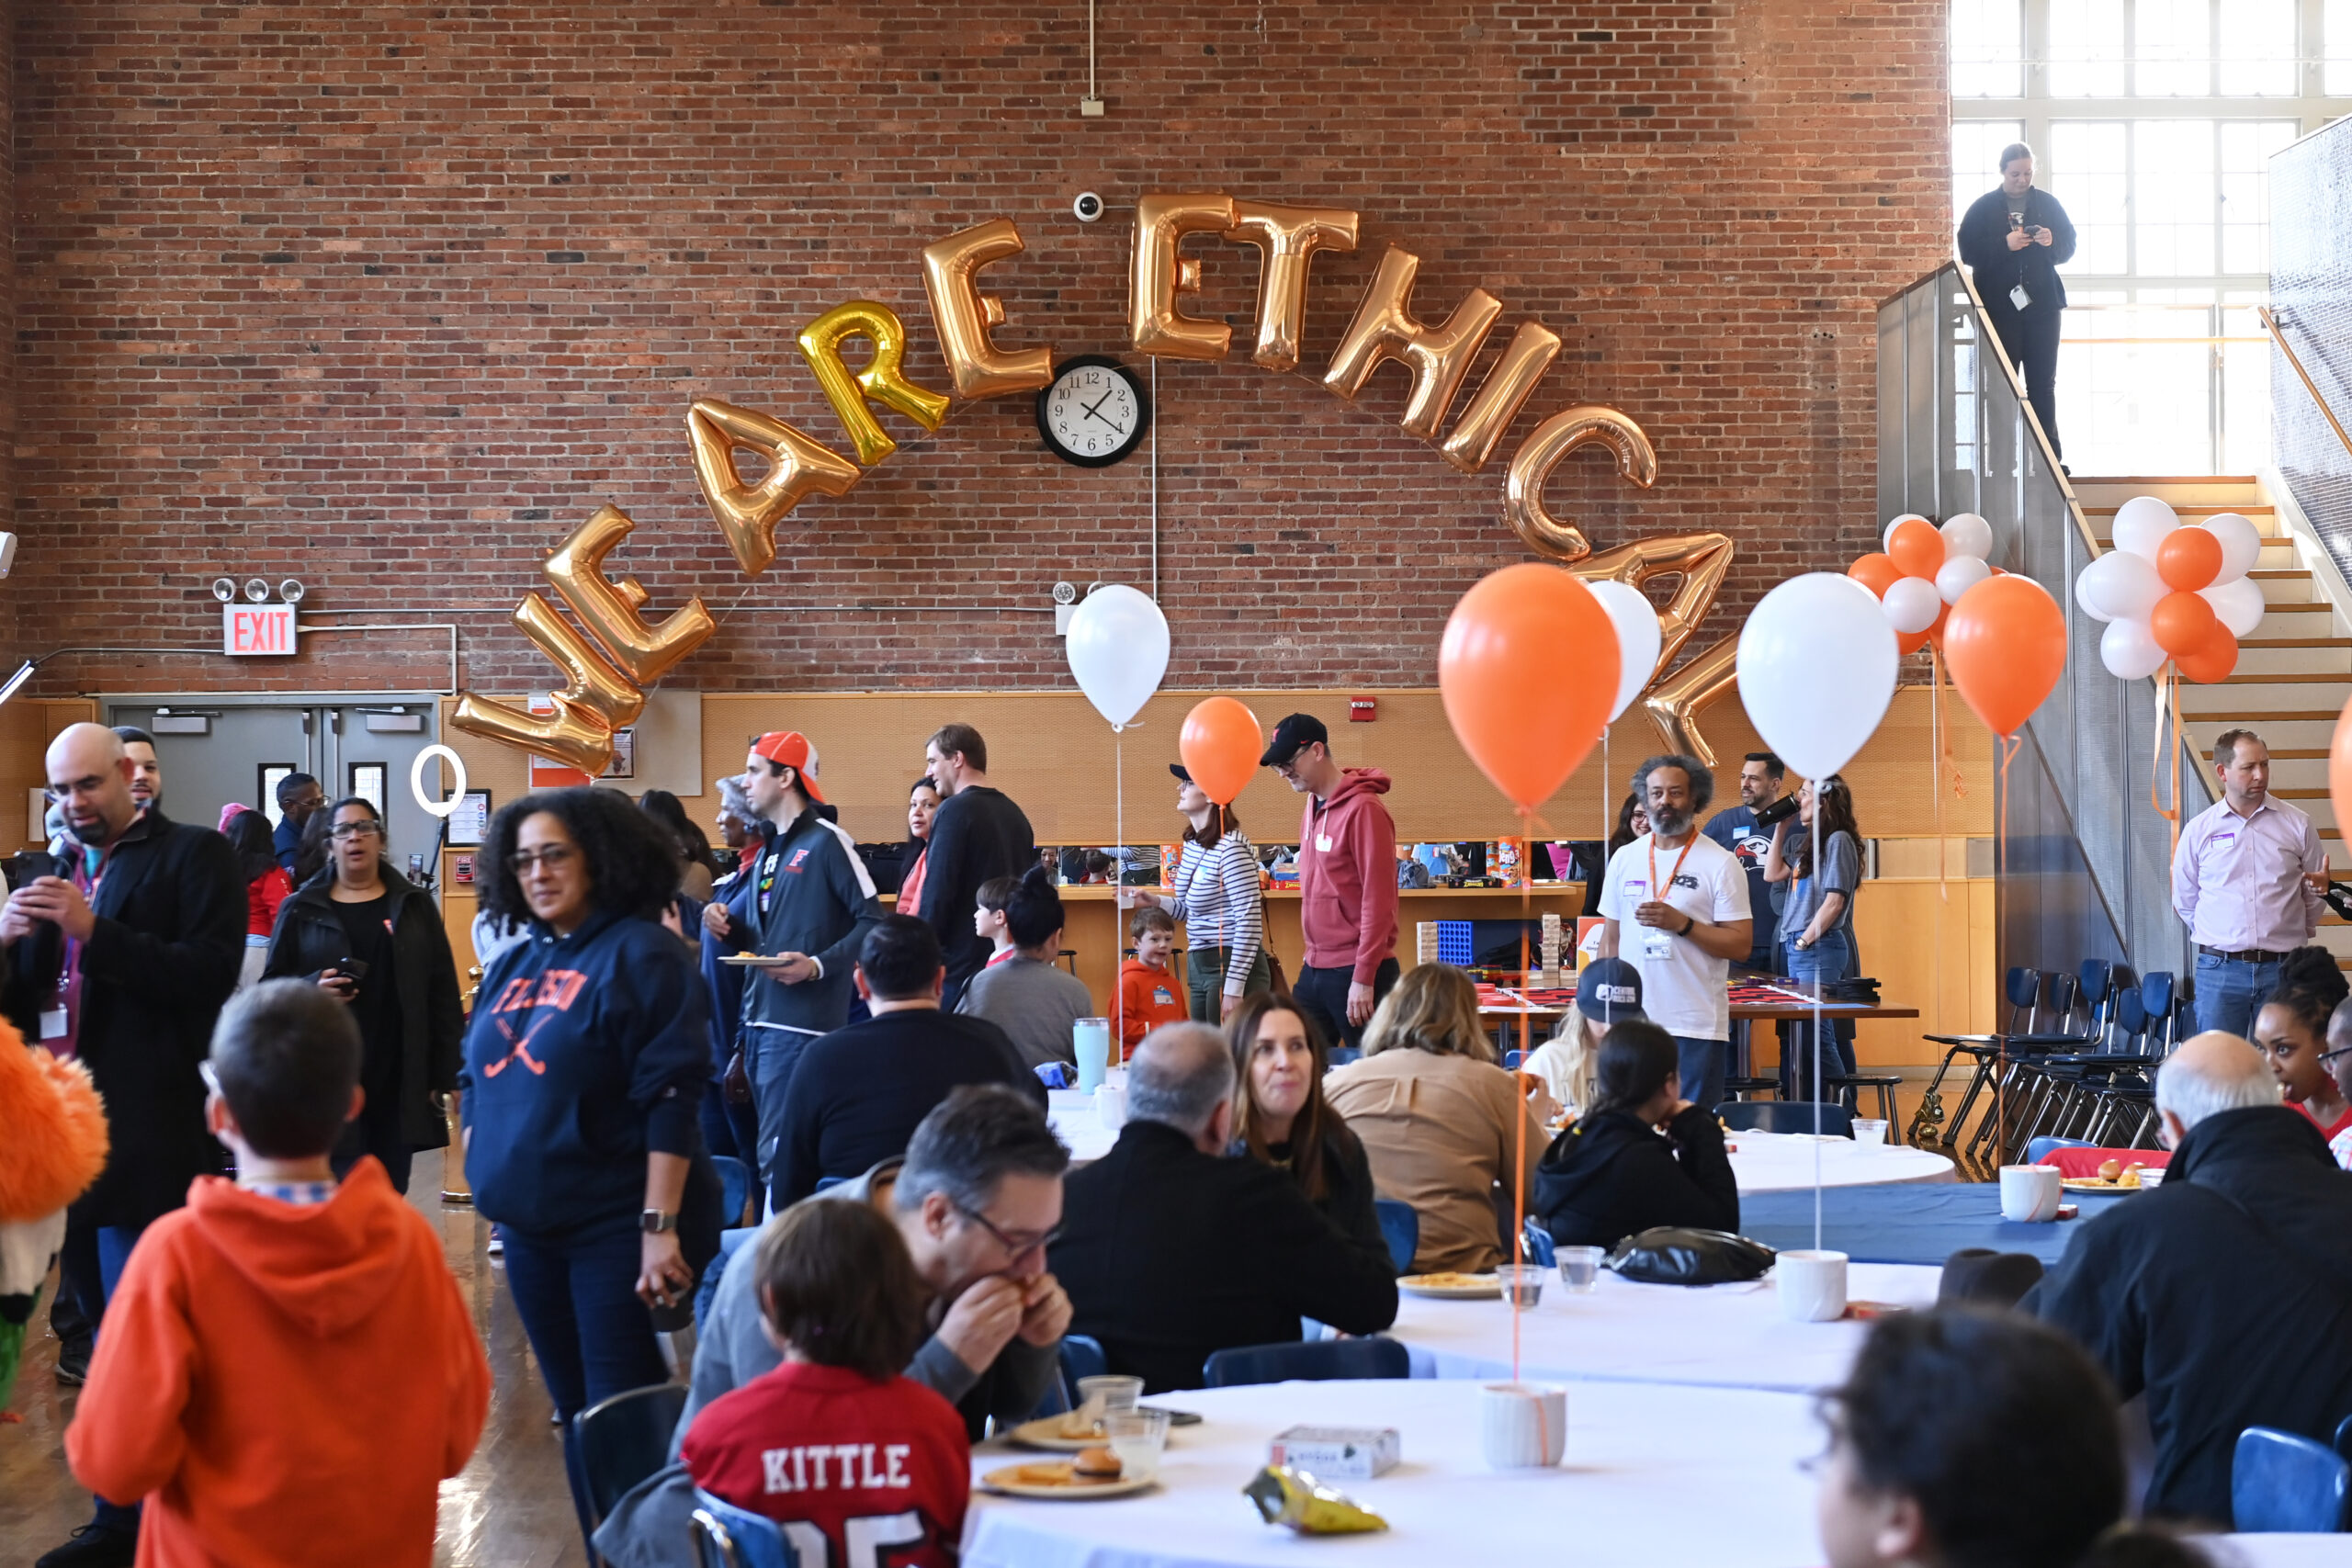 A large group of people sits and stands in the Ethical Culture Fieldston School dining room, surrounded by orange and white balloons and with "We Are Ethical" spelled out in gold balloons on the far wall.